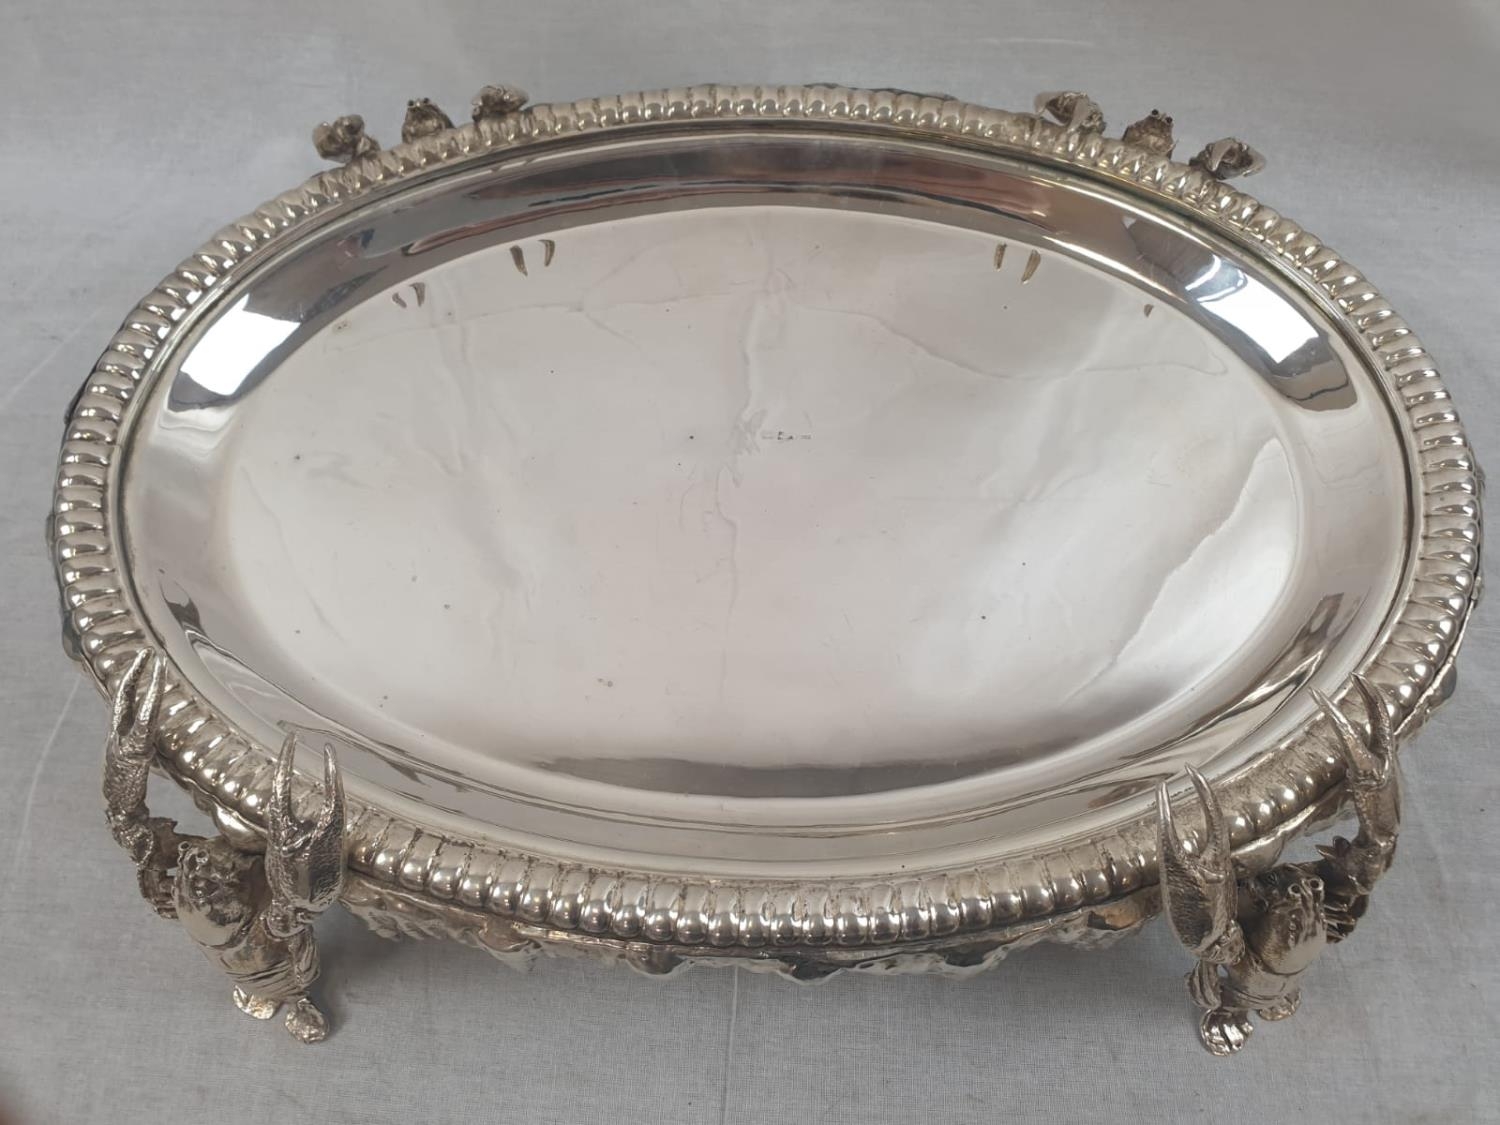 A VERY RARE SPANISH SILVER LOBSTER SERVING TRAY CIRCA 1920 , 4.2KG AND 50 X 35 CMS. AN INTERESTING - Bild 3 aus 10